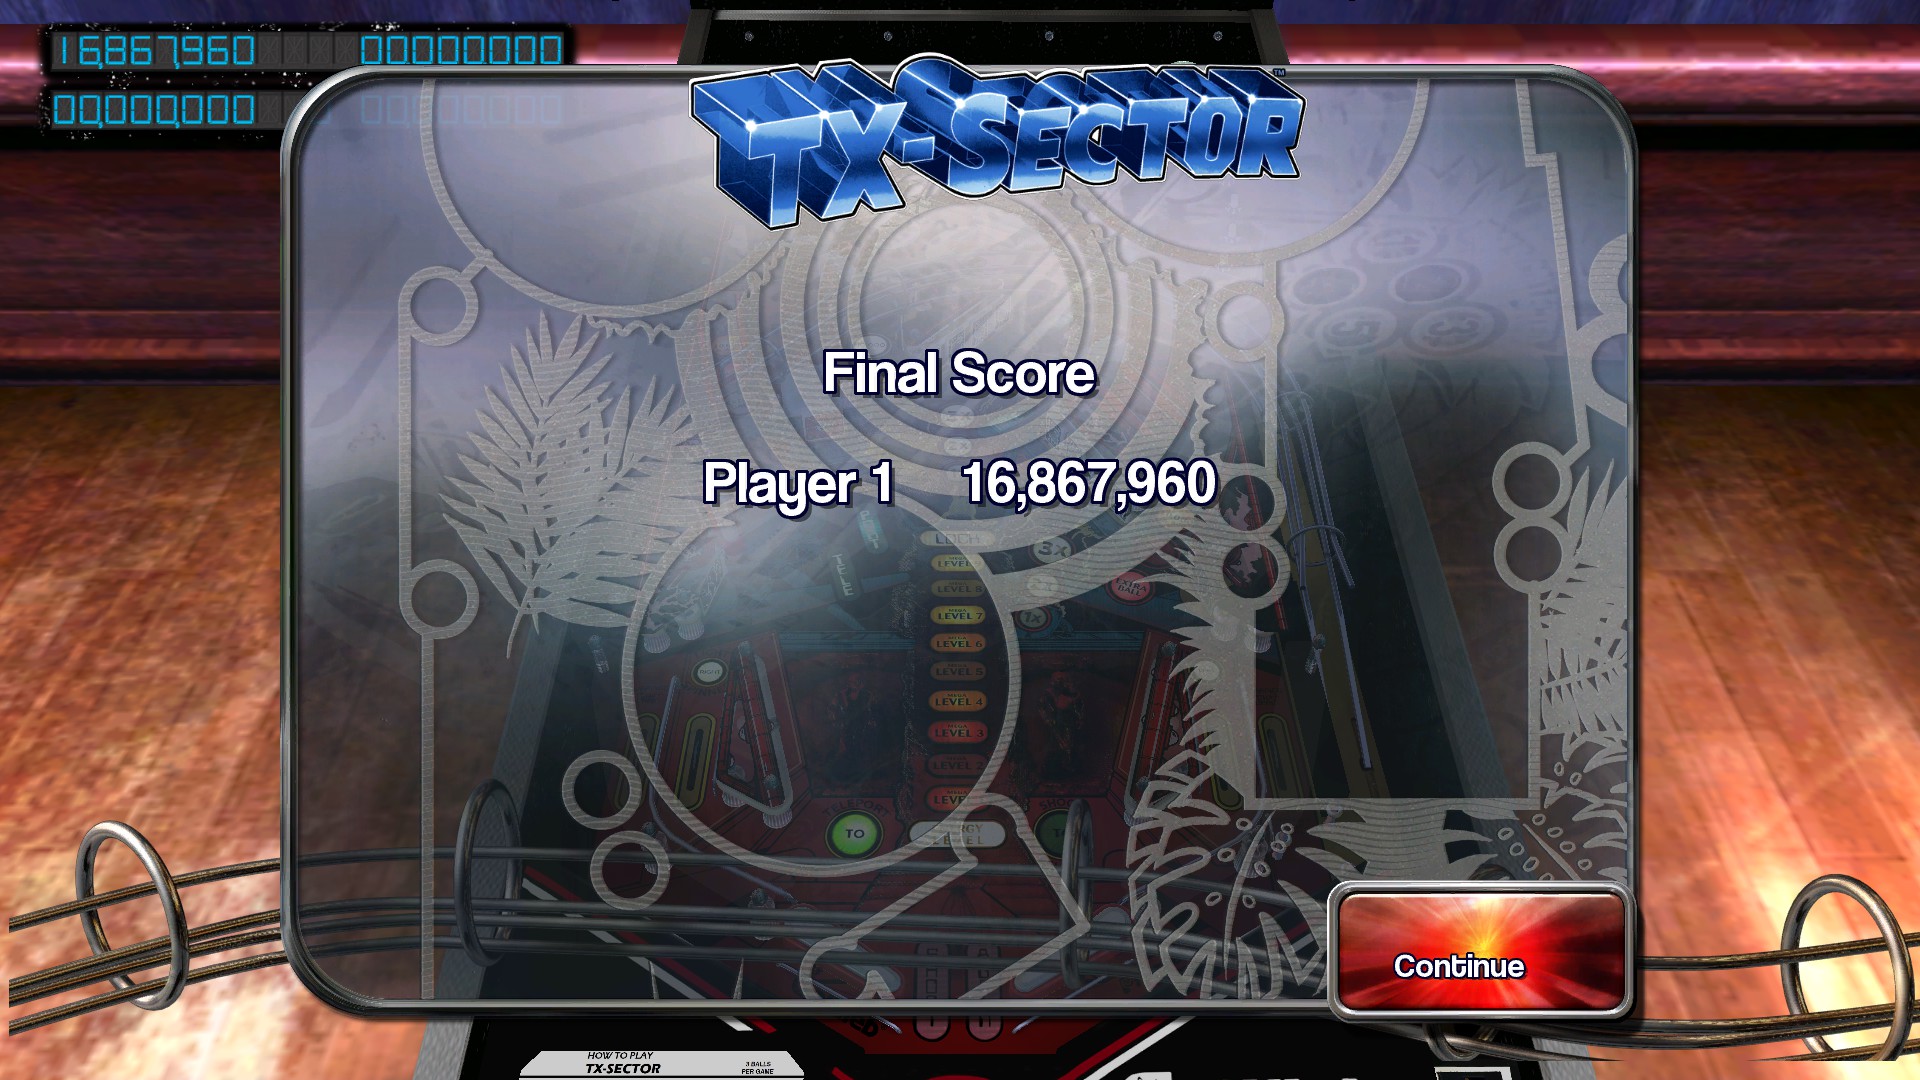 TheTrickster: Pinball Arcade: TX-Sector (PC) 16,867,960 points on 2016-06-10 07:39:38